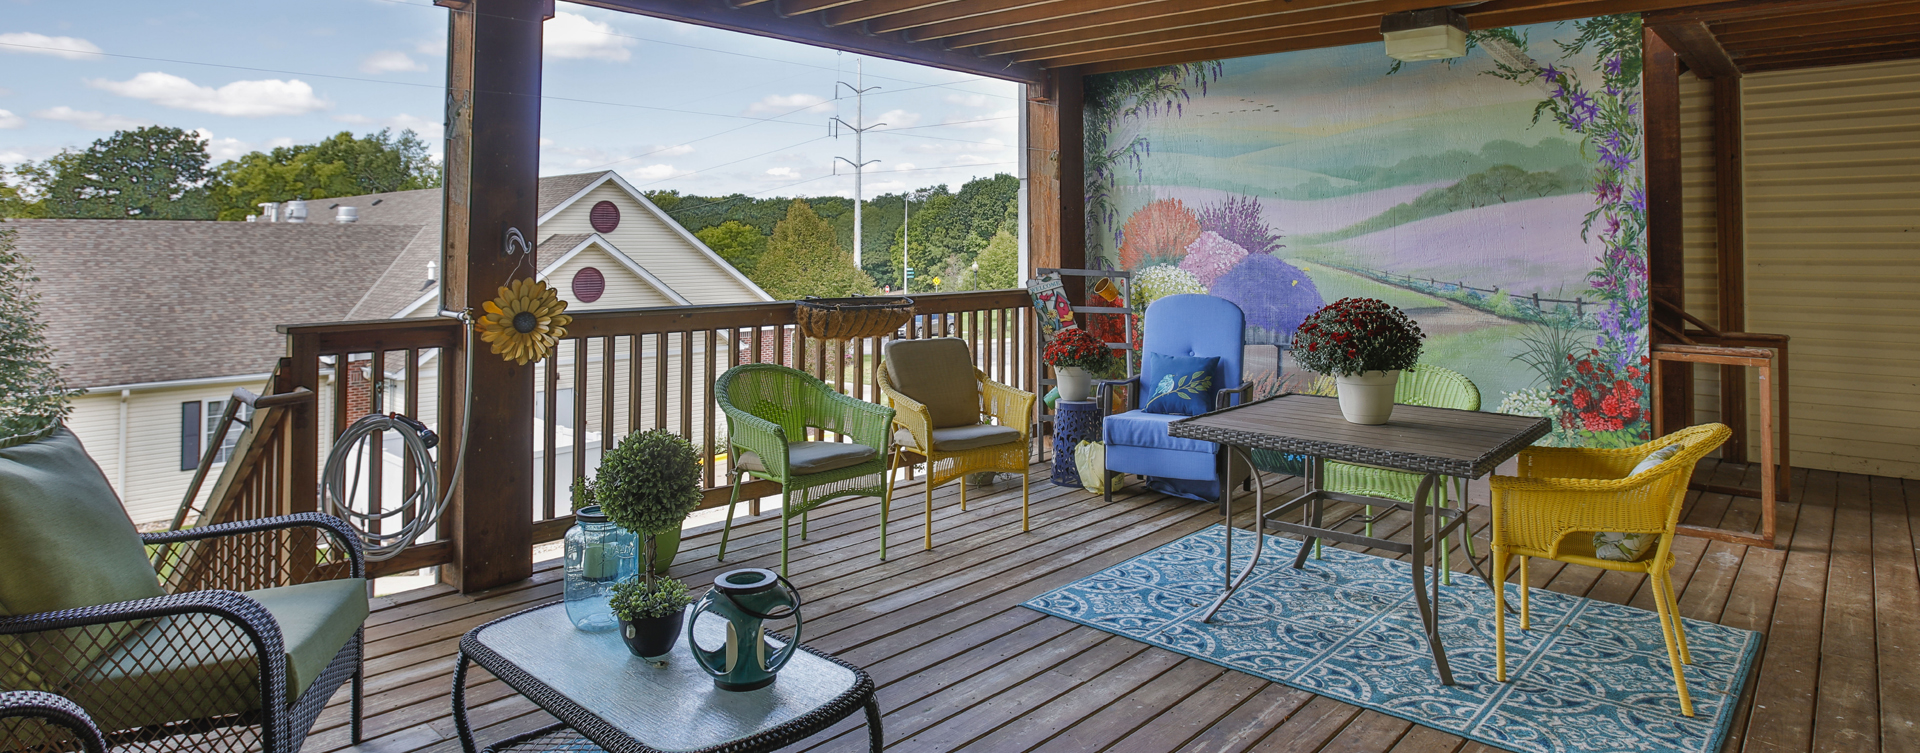 Enjoy the outdoors in a whole new light by stepping onto our back deck at Bickford of Peoria